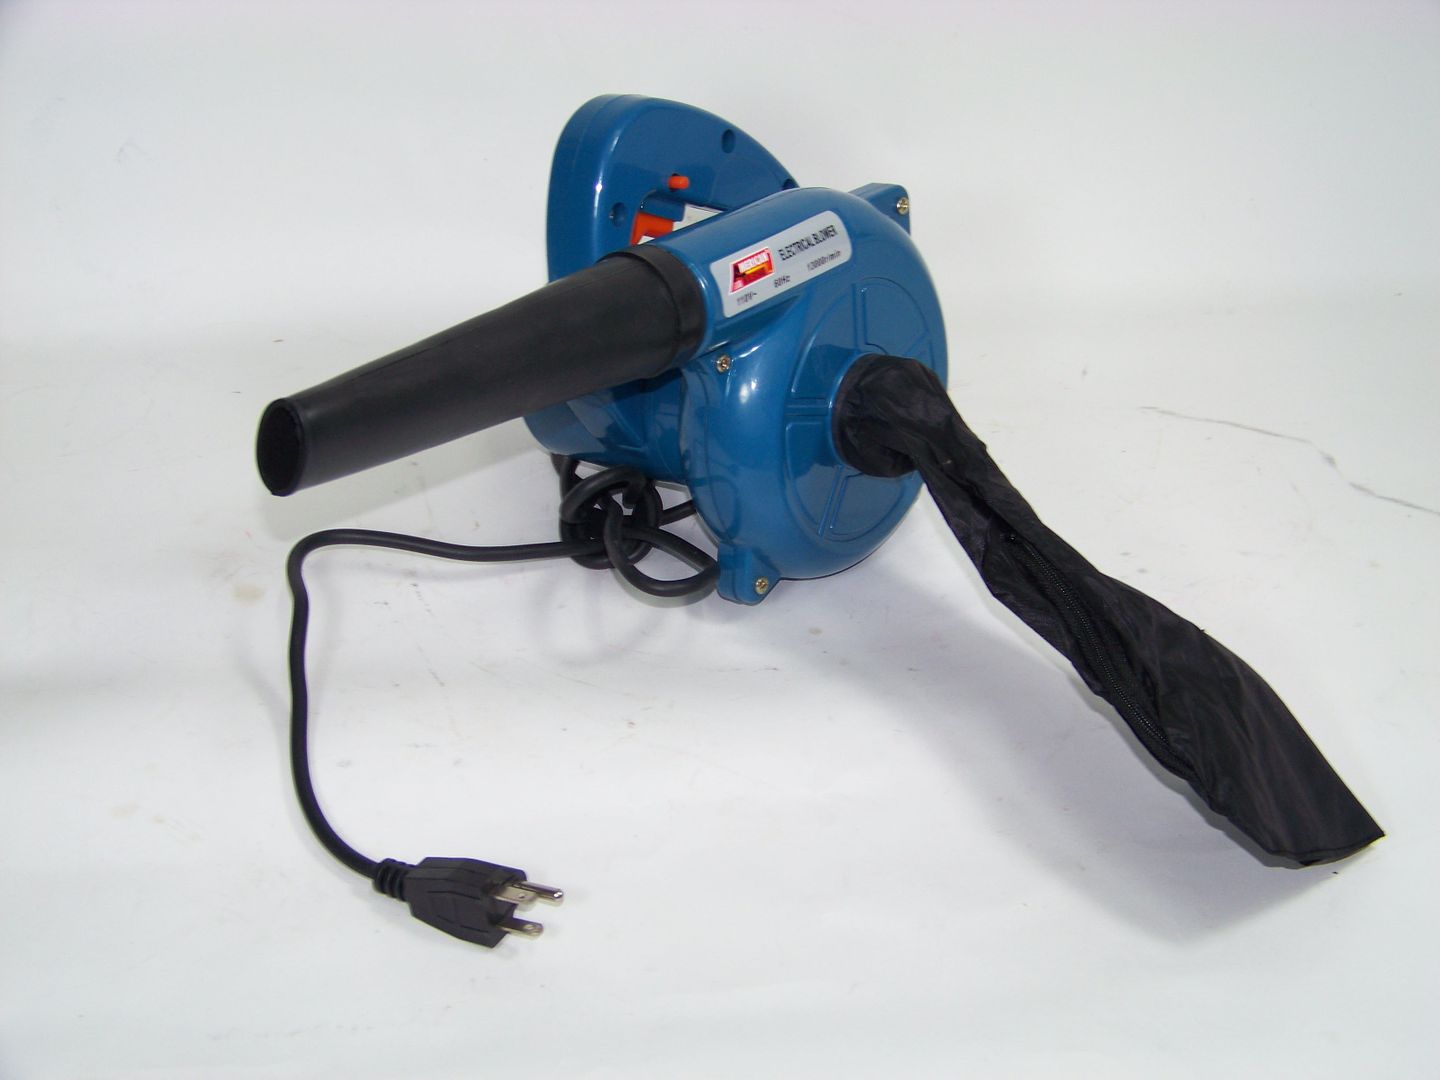 ELECTRIC BLOWER AND VACUUM 13000 rpm DUST LEAF CLEANER  